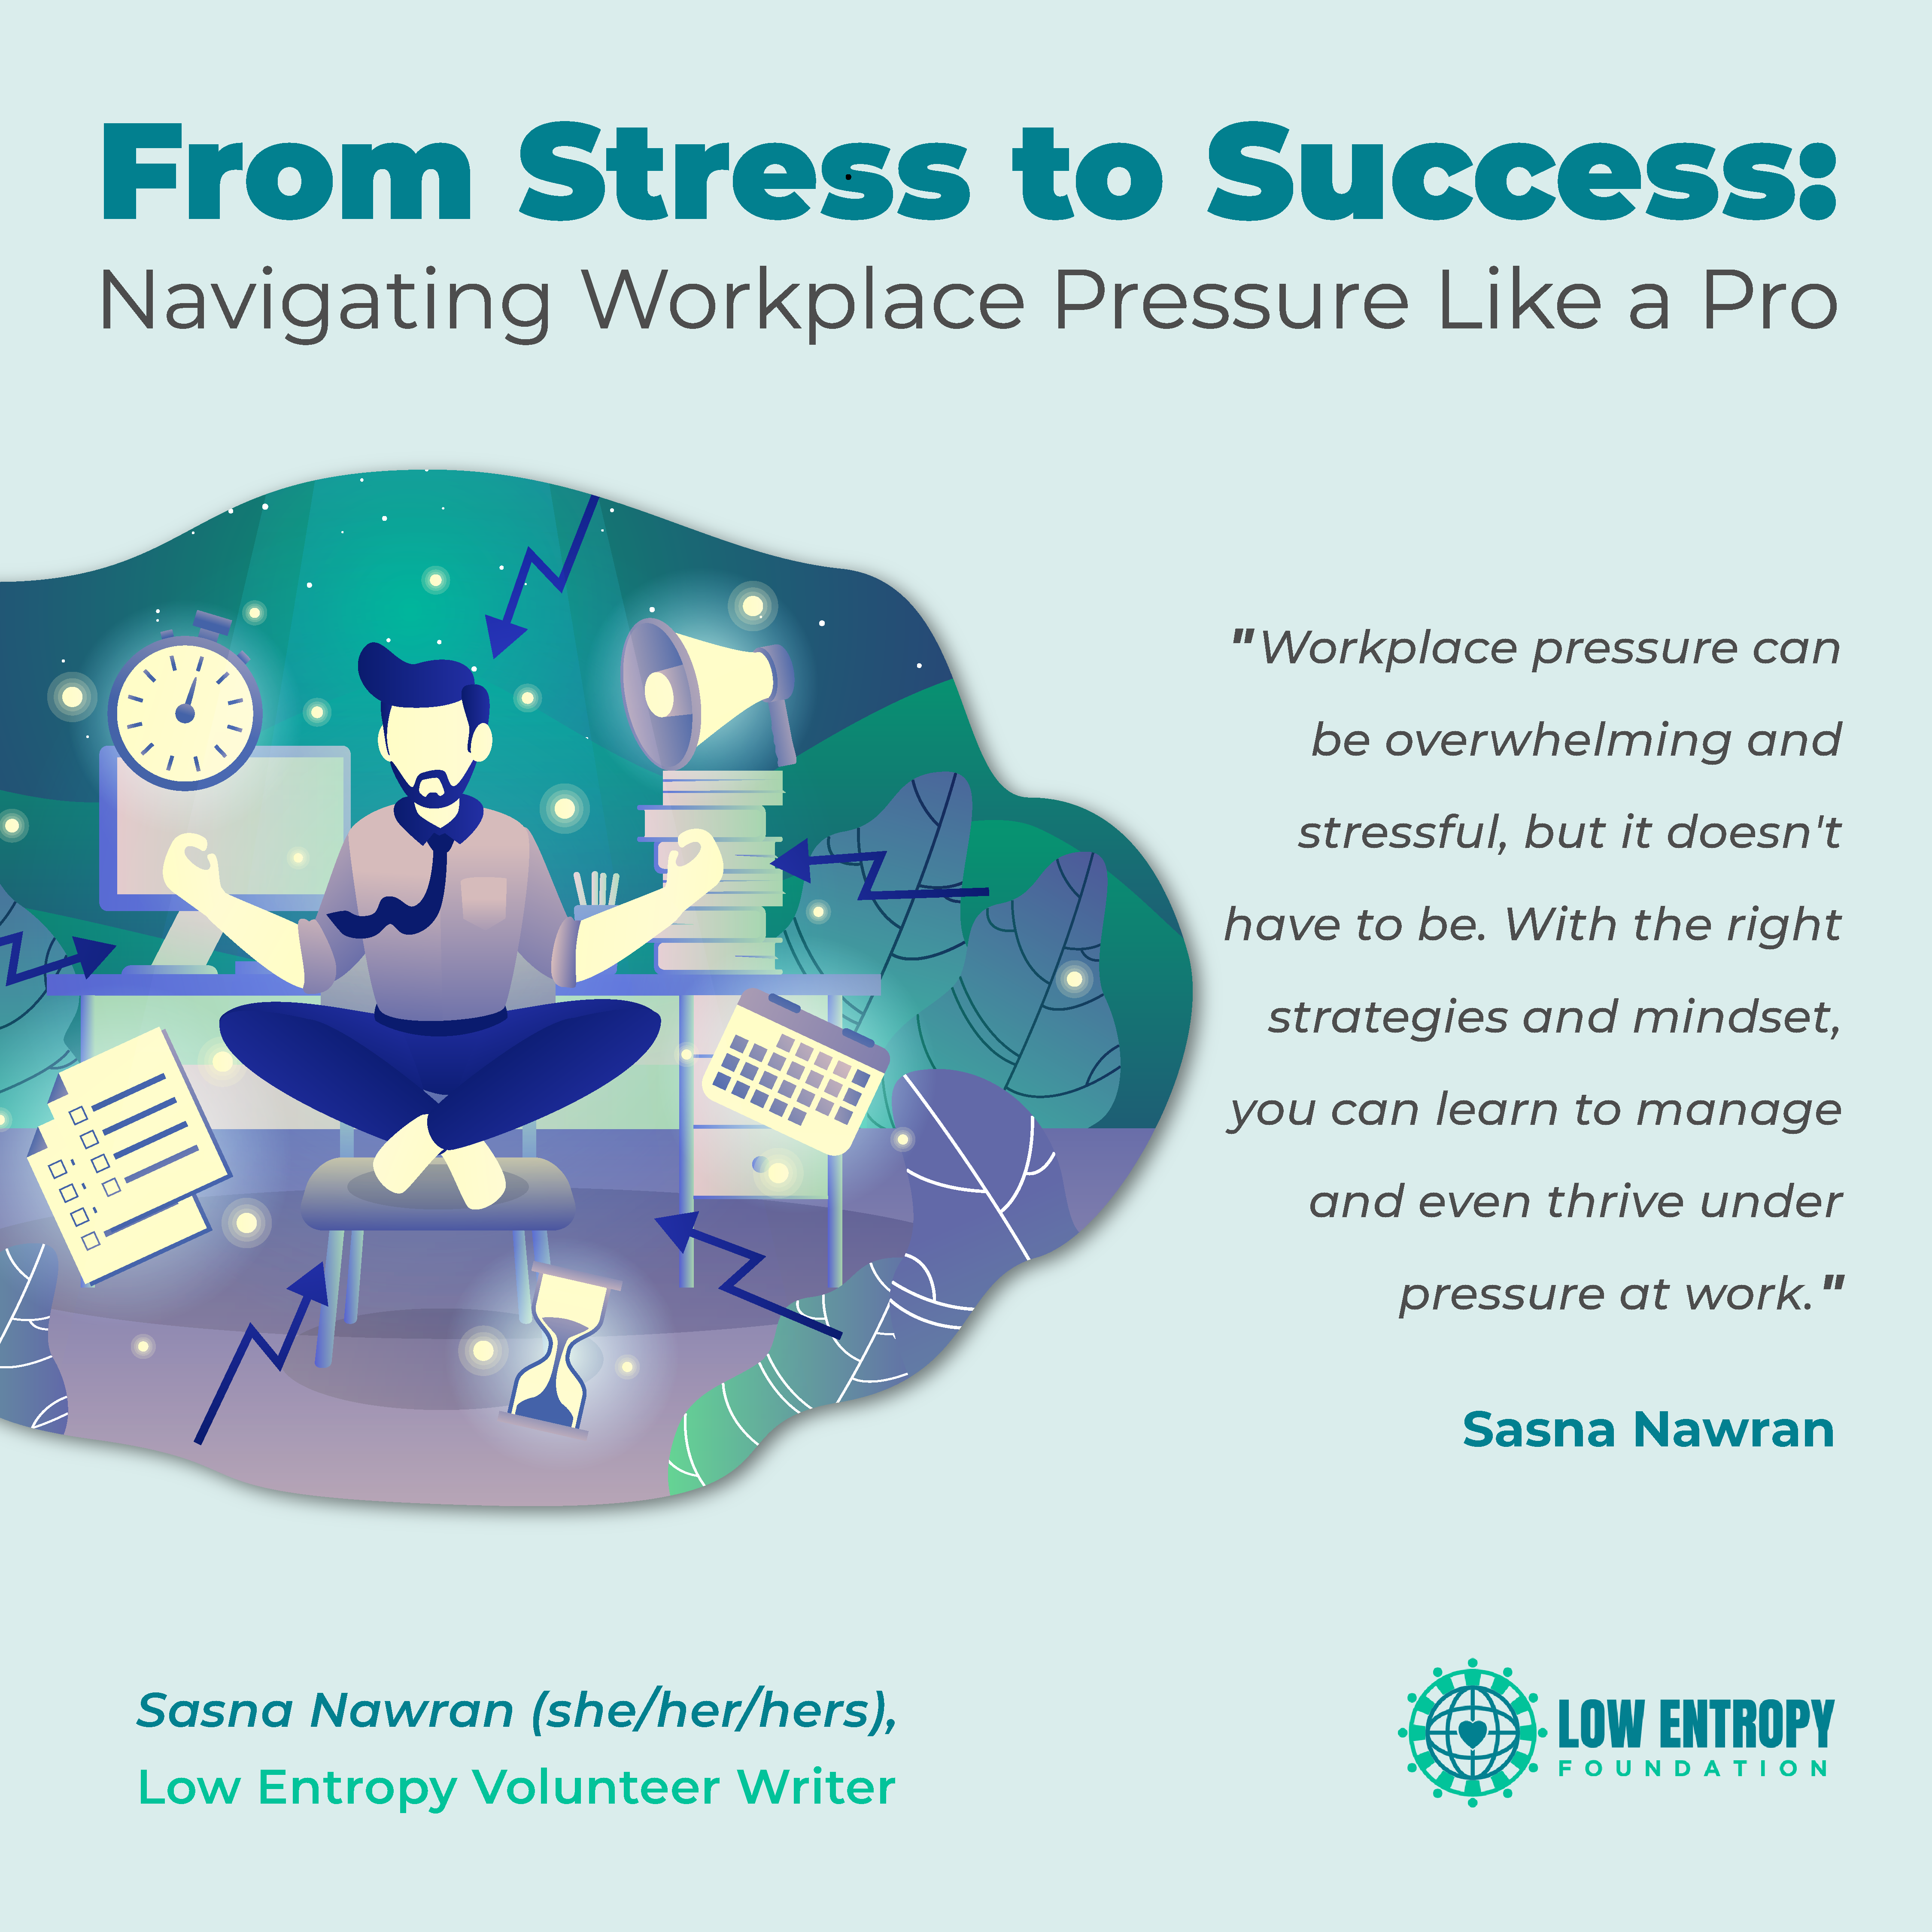 From Stress to Success: Navigating Workplace Pressure Like a Pro